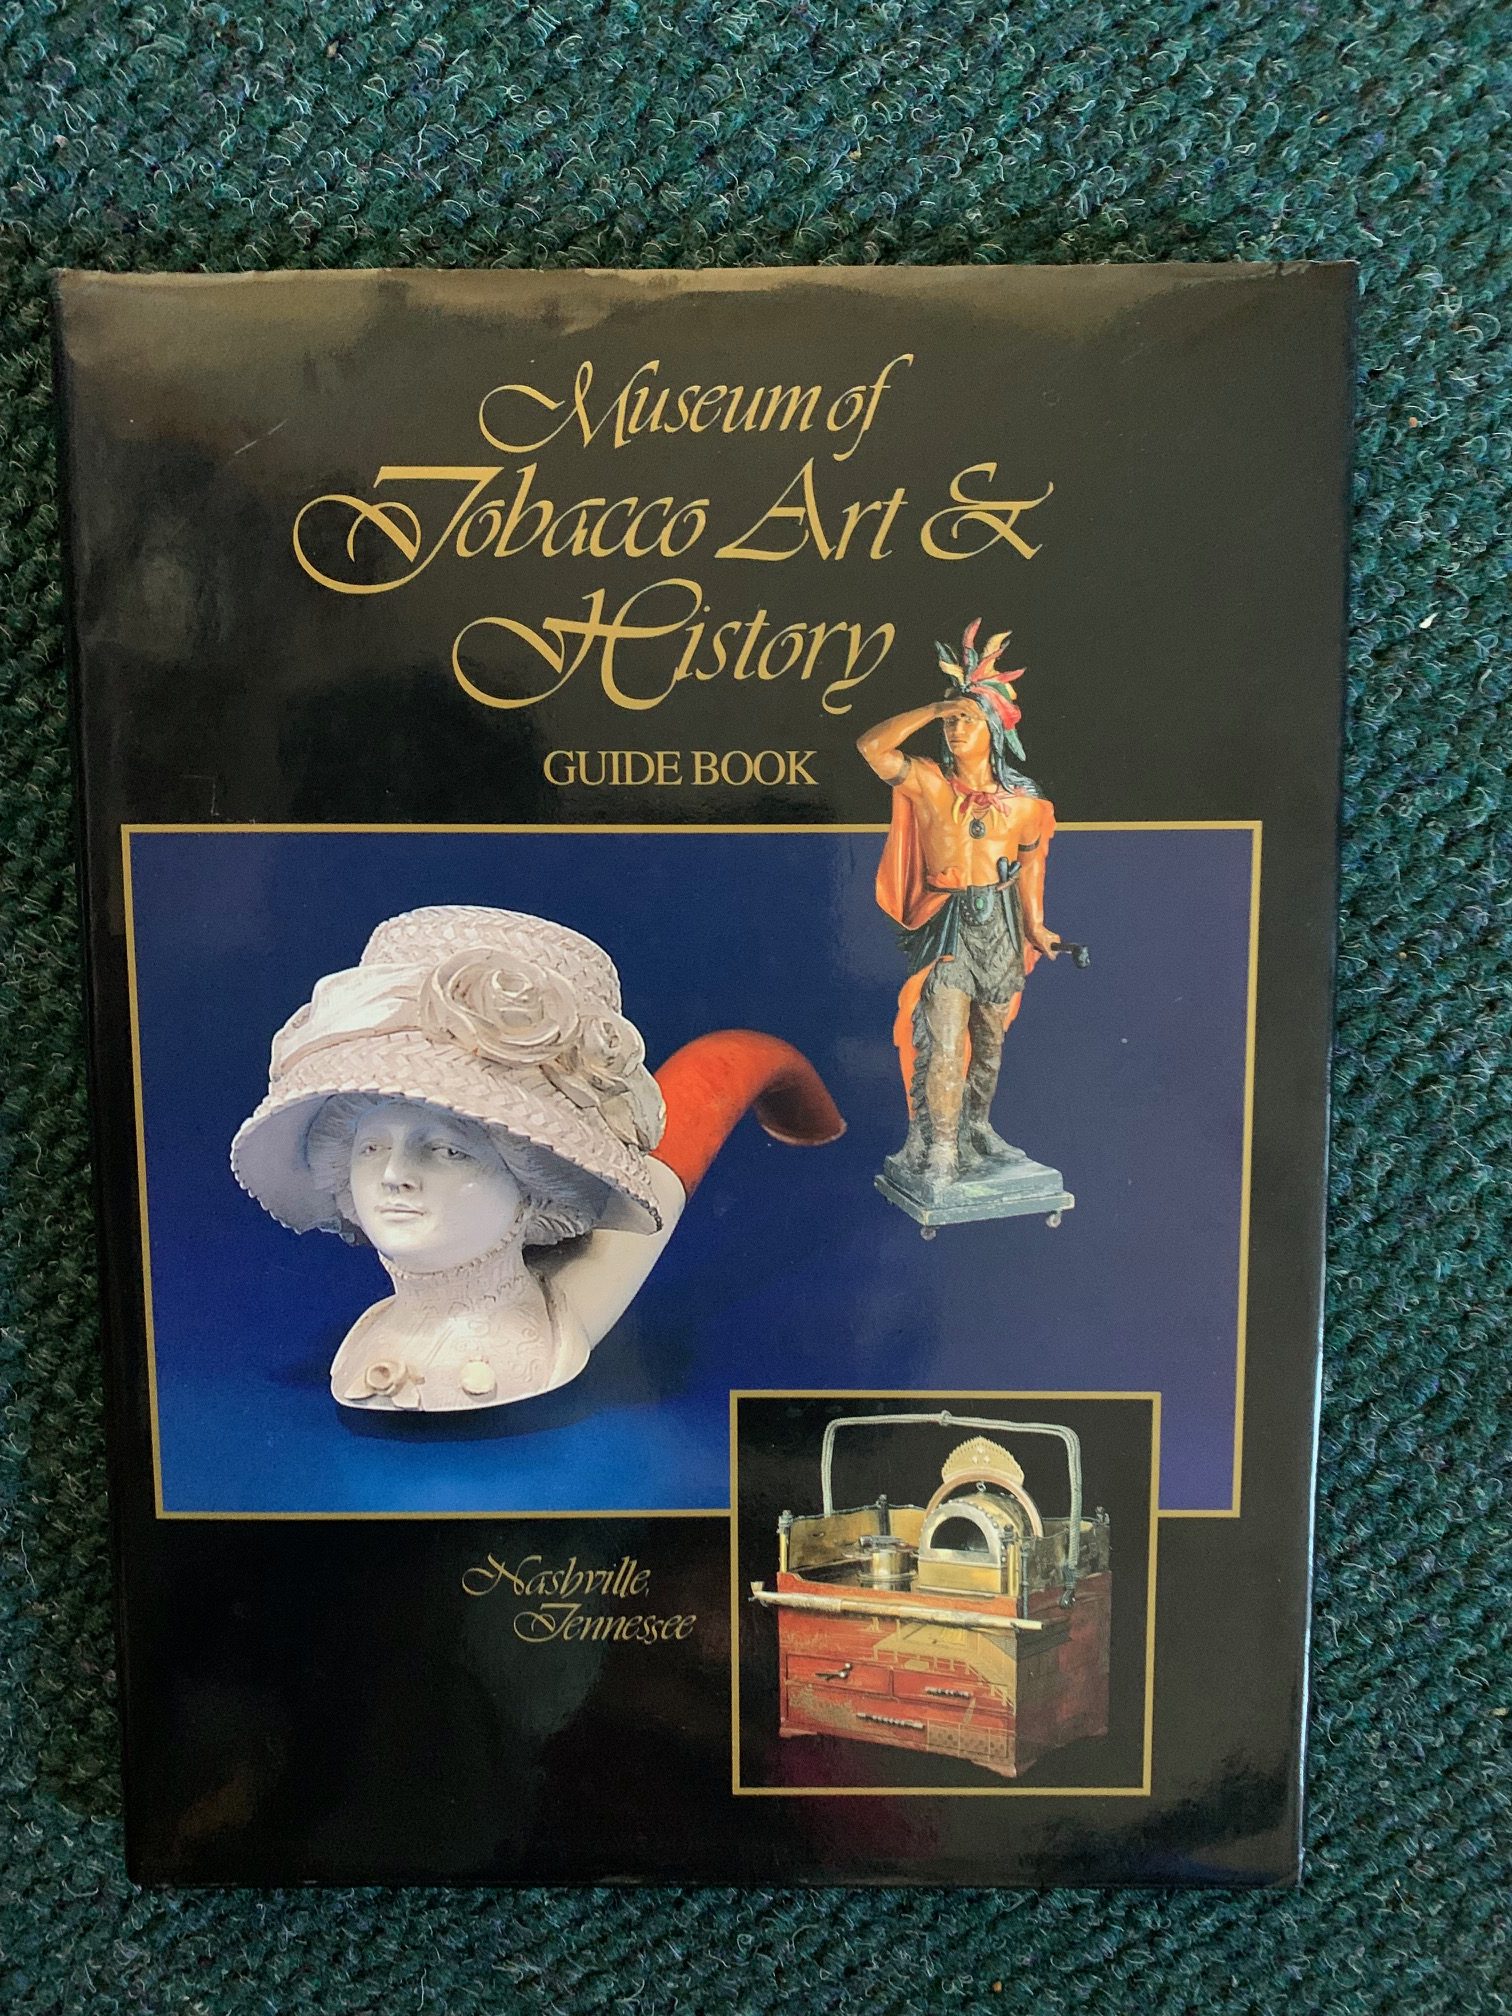 Museum of Tobacco Art & History Guide Book Image